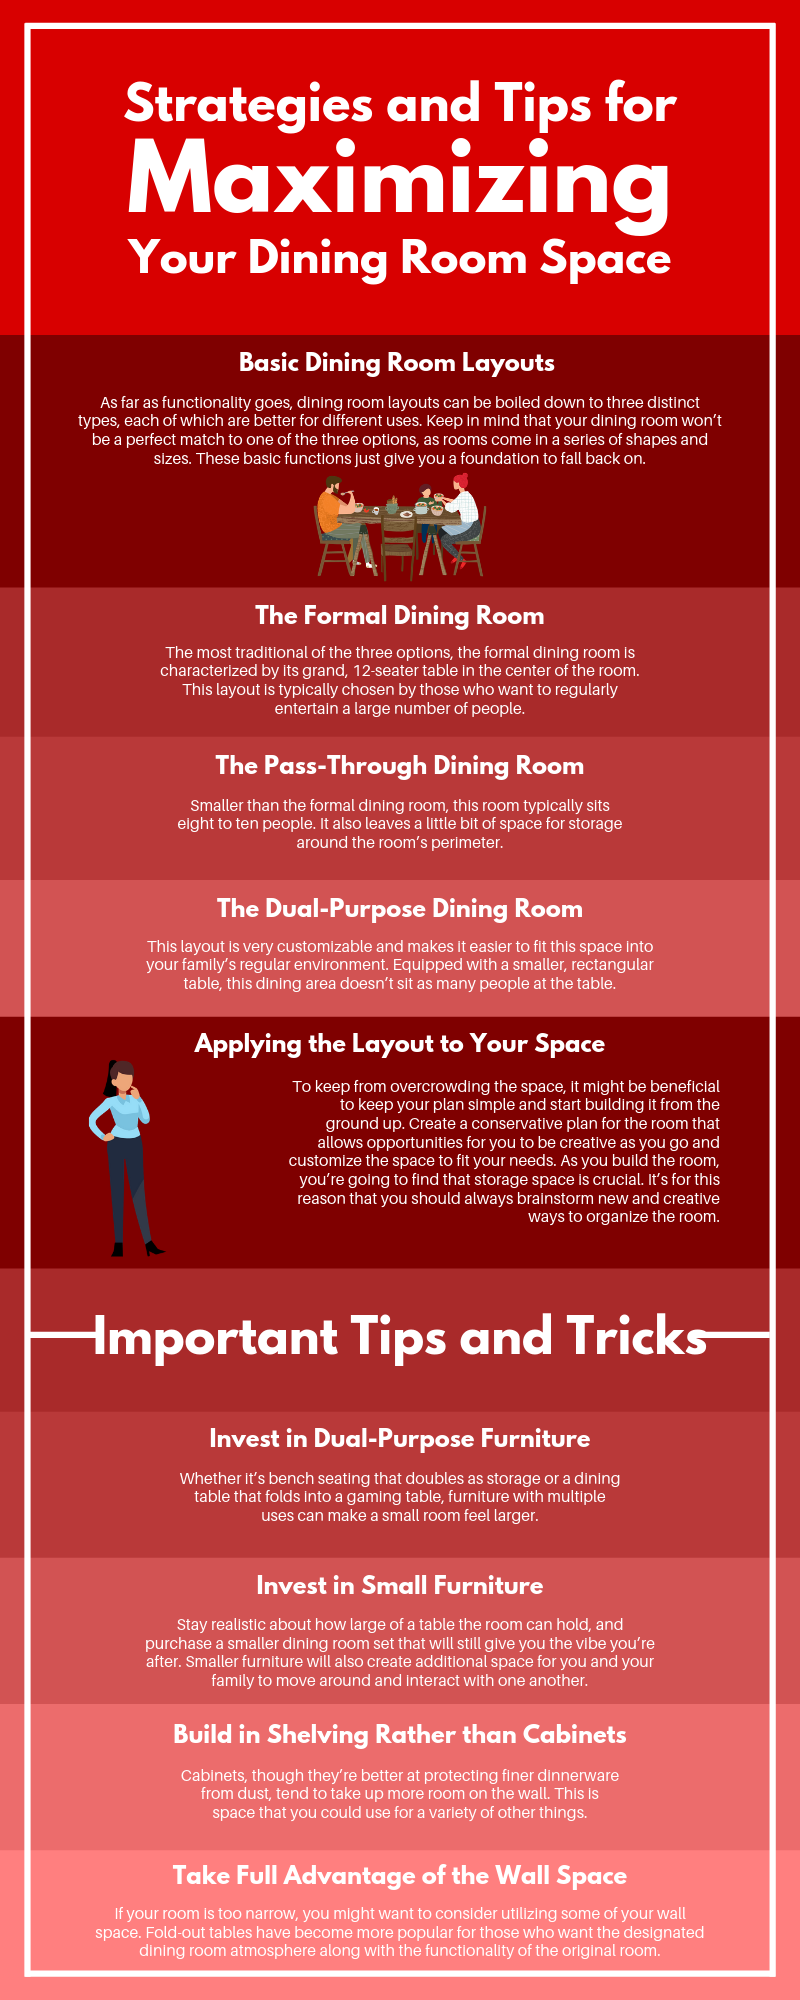 strategies and tips for maximizing your dining room space infographic